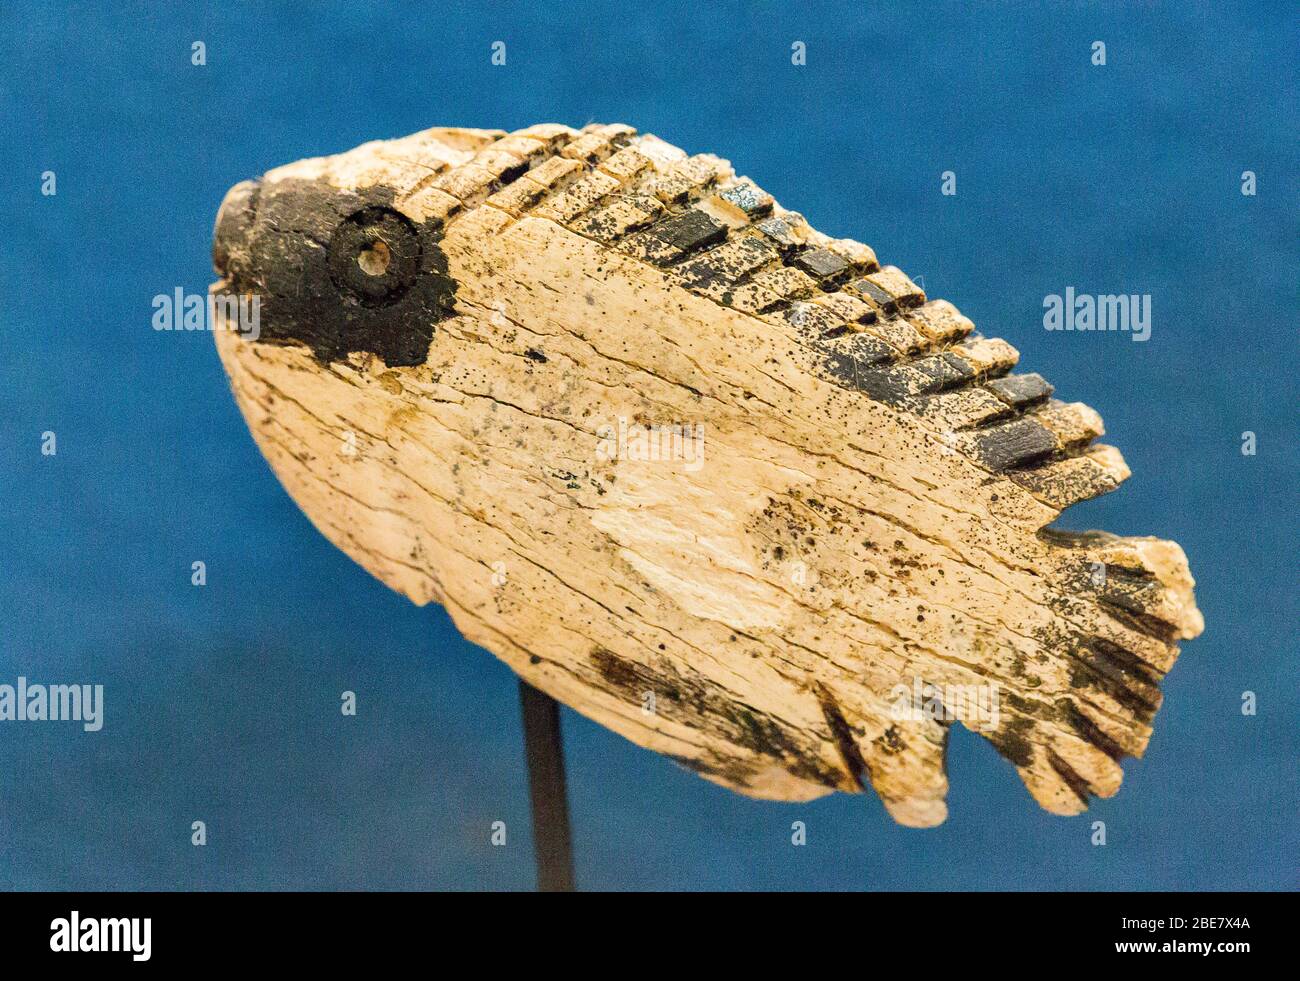 Egypt, Cairo, Egyptian Museum, statuette coming from Tell el Farkha, early Dynastic period, in hippopotamus tusk. Fish. Stock Photo